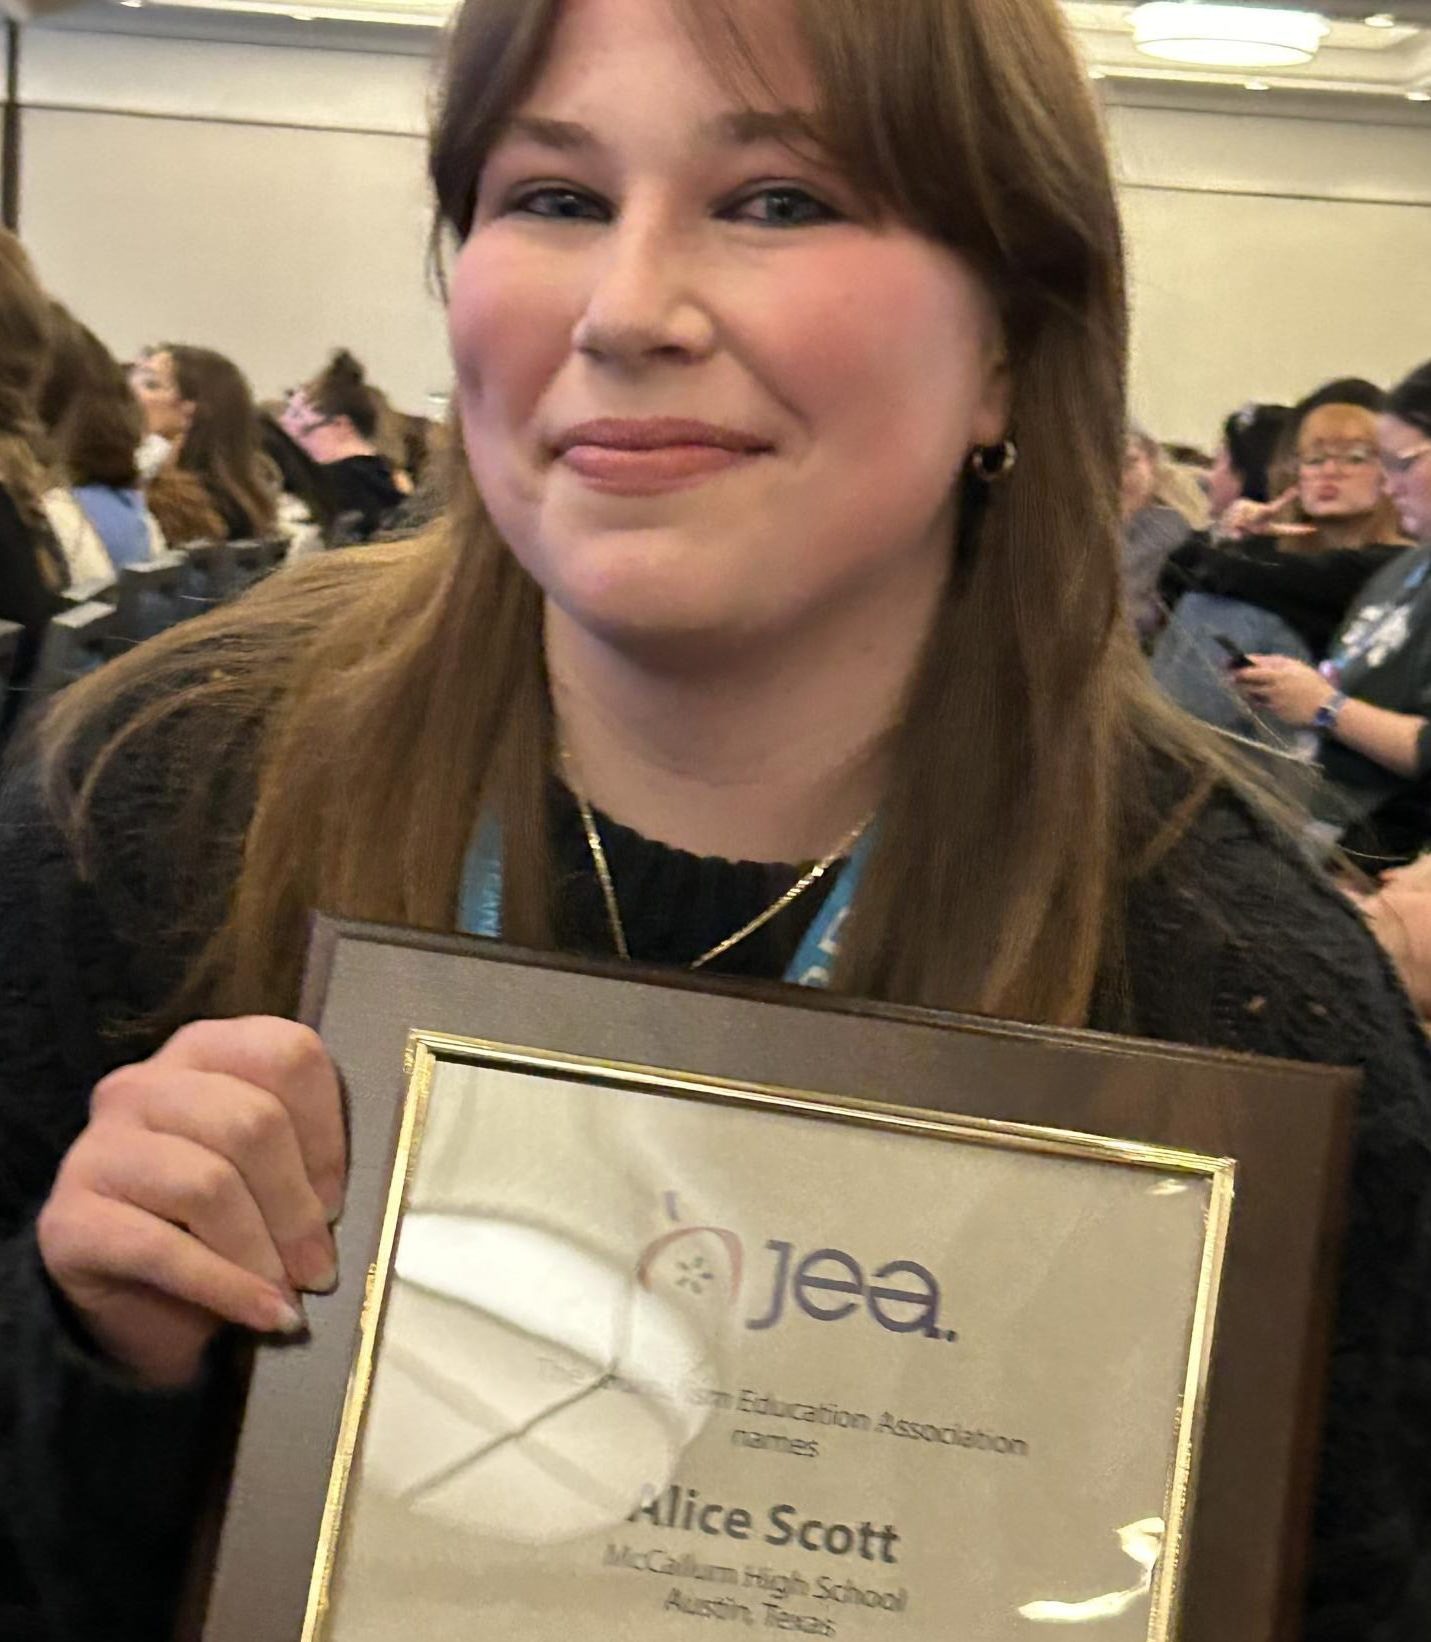 JOY TO THE NATION: Senior Alice Scott, 2022-2024 Shield co-editor in chief, poses with her 2024 JEA Journalist of the Year award plaque she had just received at the NSPA/JEA Spring National Journalism Convention NSPA Awards Ceremony in the Sheraton Kansas City Hotel at Crown Center Grand Ballroom.